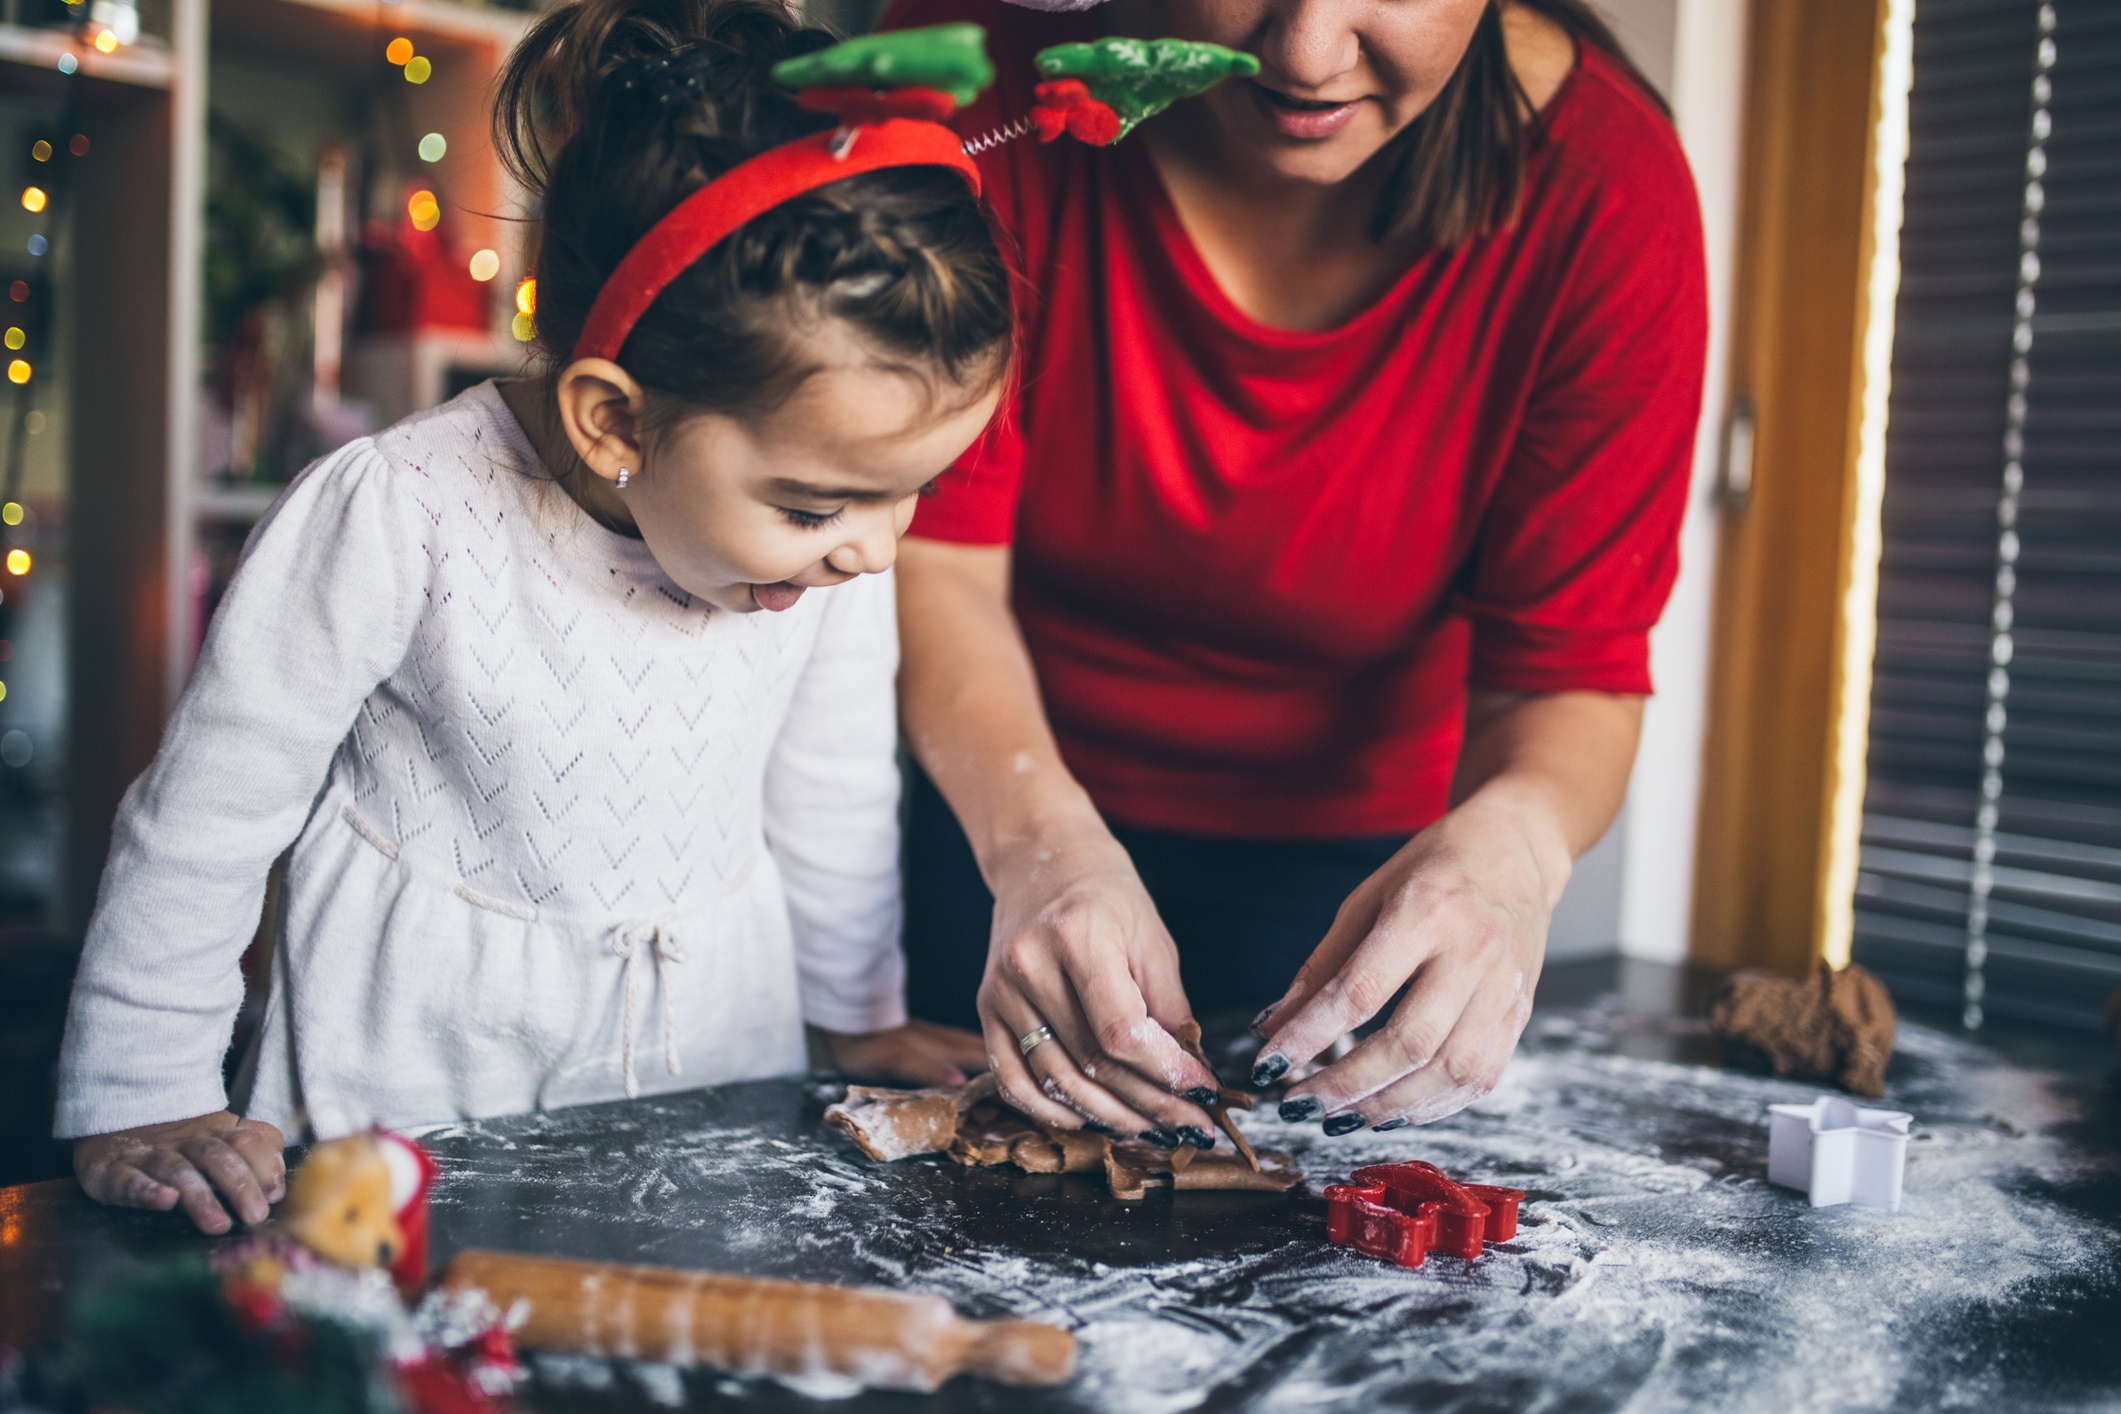 A mother and daughter making Christmas cookies together